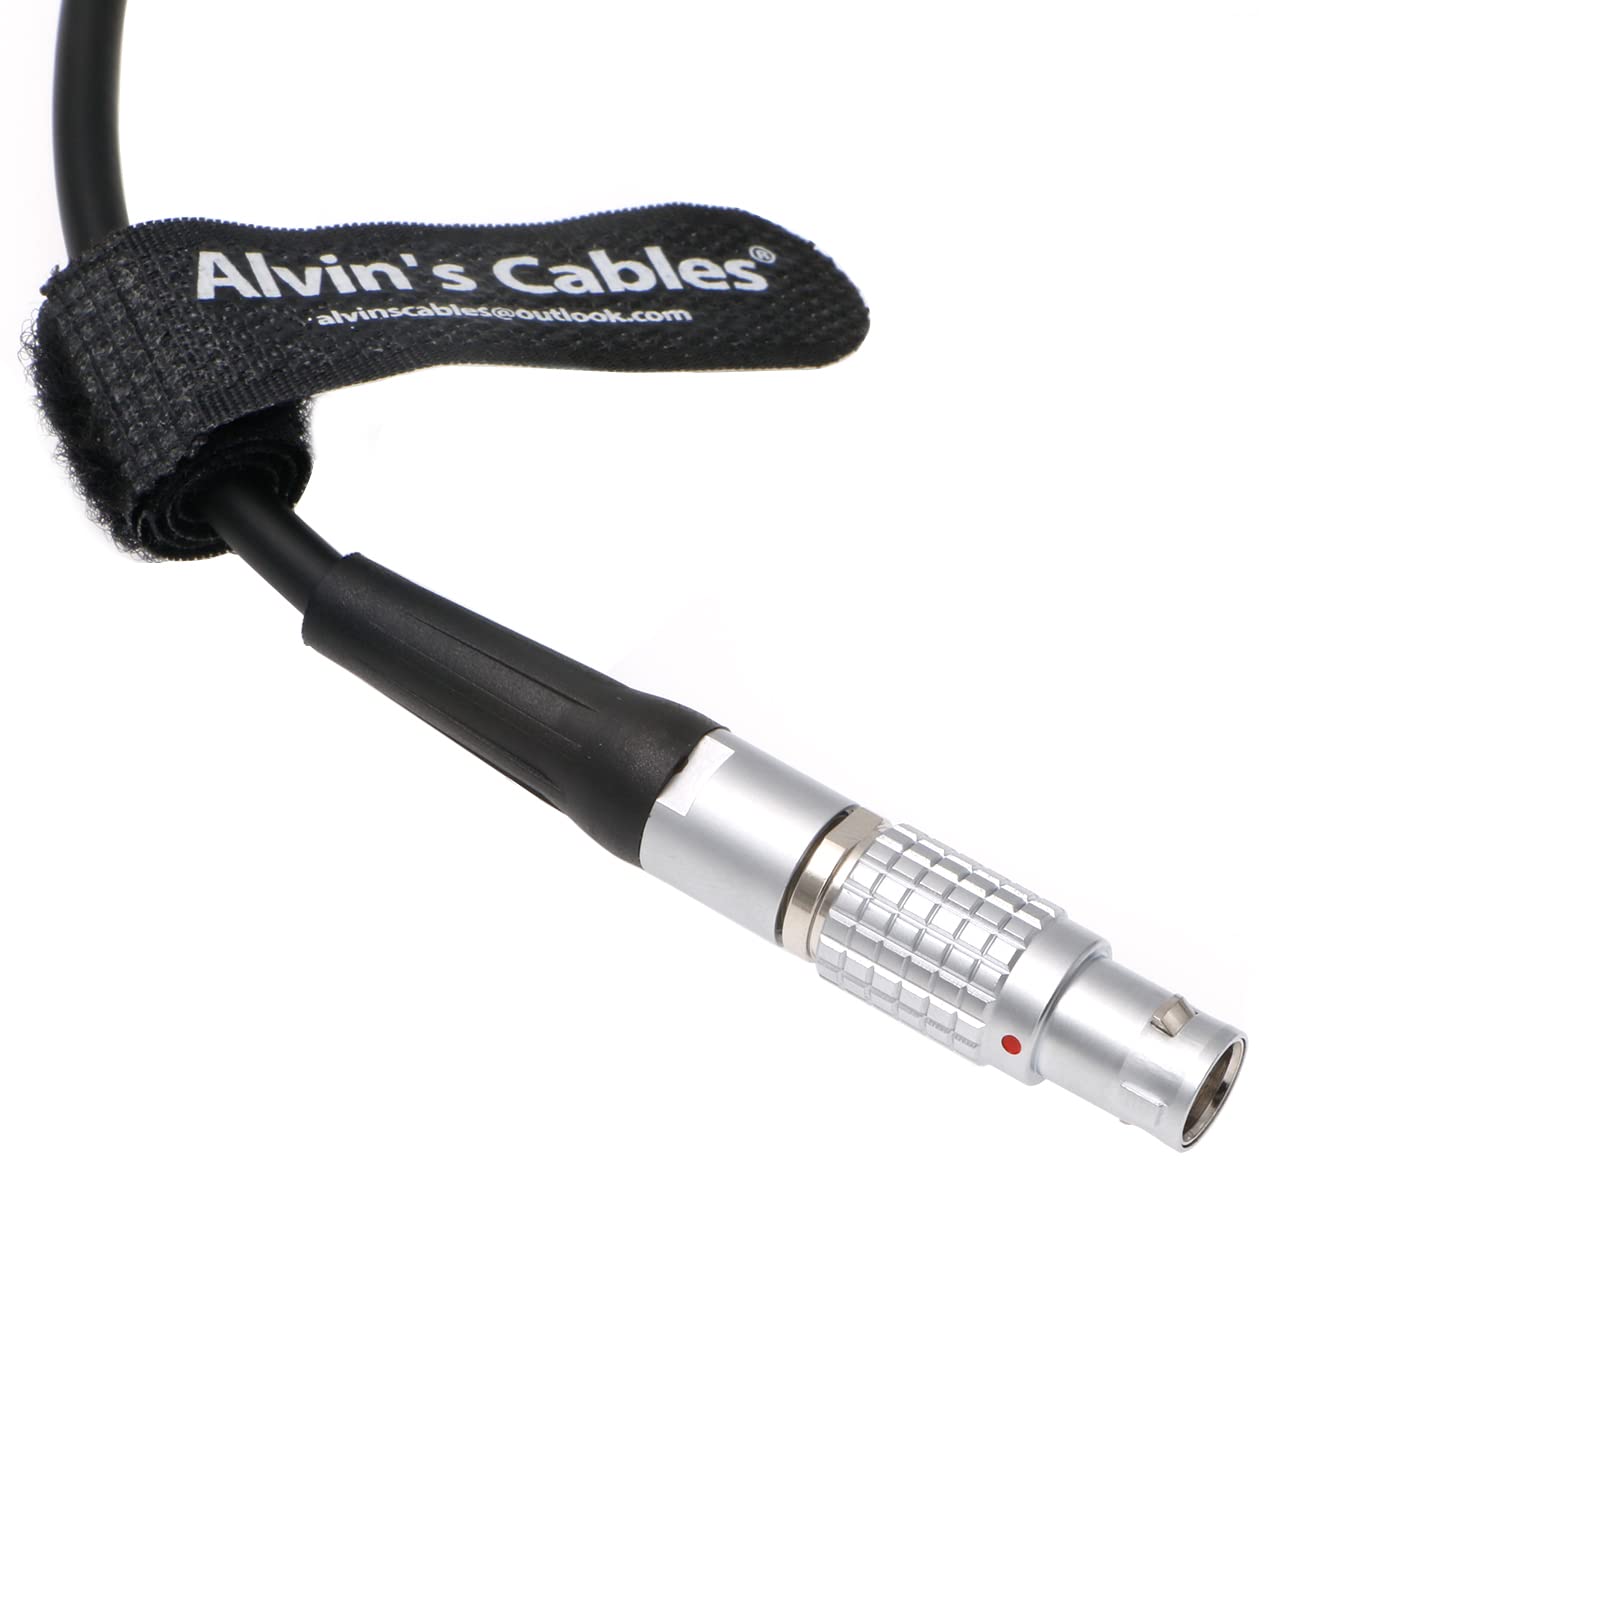 Alvin’s Cables Preston MDR3| MDR4 Run-Stop Cable for ARRI-Alexa Camera 1B 10 Pin Male to 3 Pin Male RS Cable 60cm|23.6inches